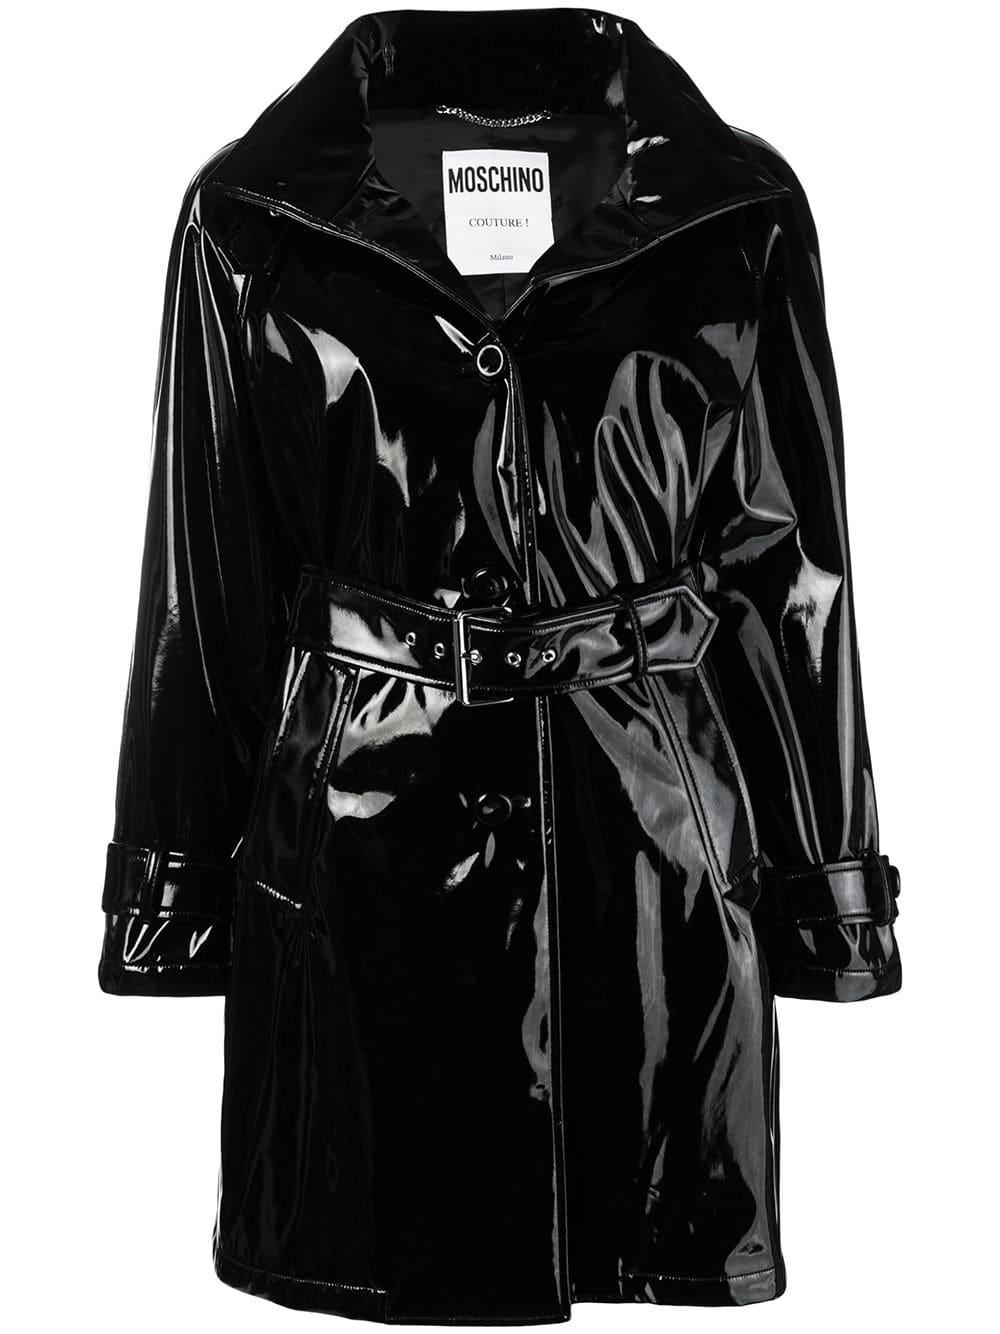 Moschino Synthetic Belted Glossy Raincoat in Black - Lyst